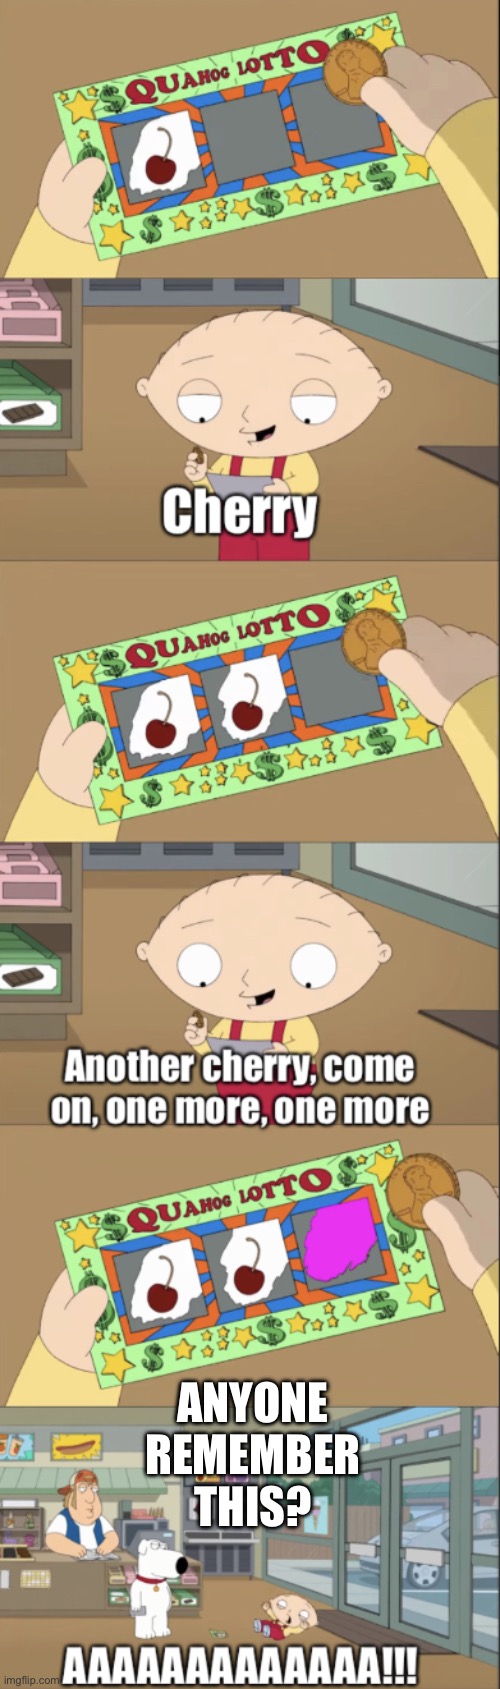 Stewie scratch card | ANYONE REMEMBER THIS? | image tagged in stewie scratch card | made w/ Imgflip meme maker